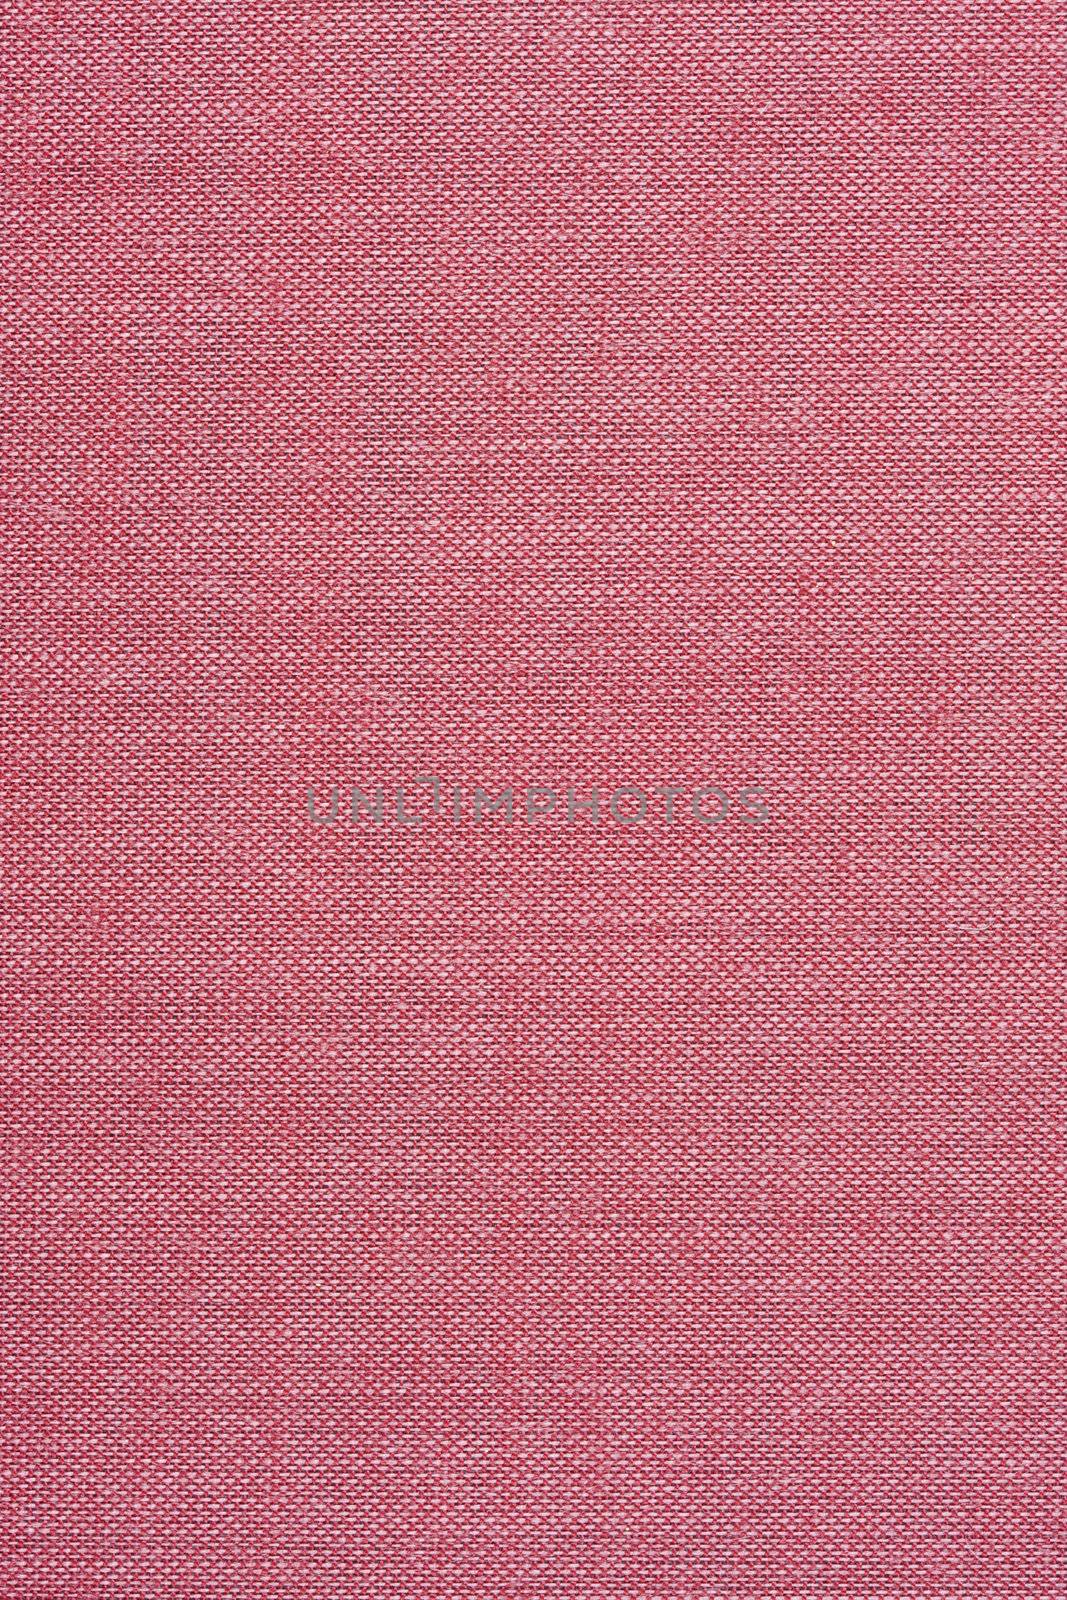 magenta textile background from a vintage book cover